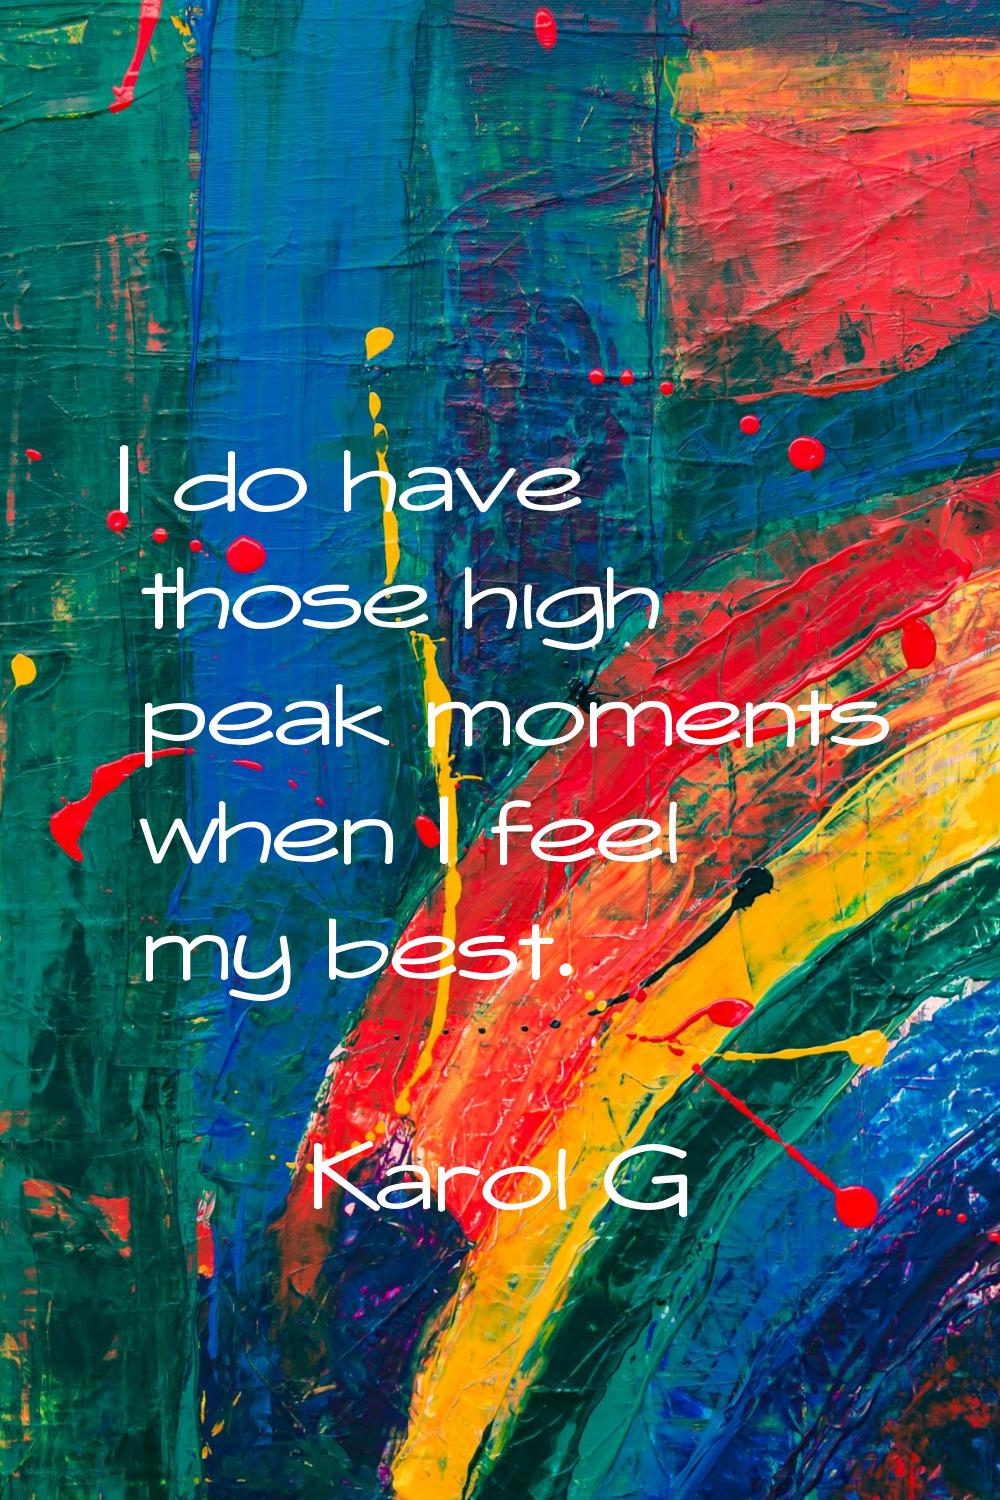 I do have those high peak moments when I feel my best.